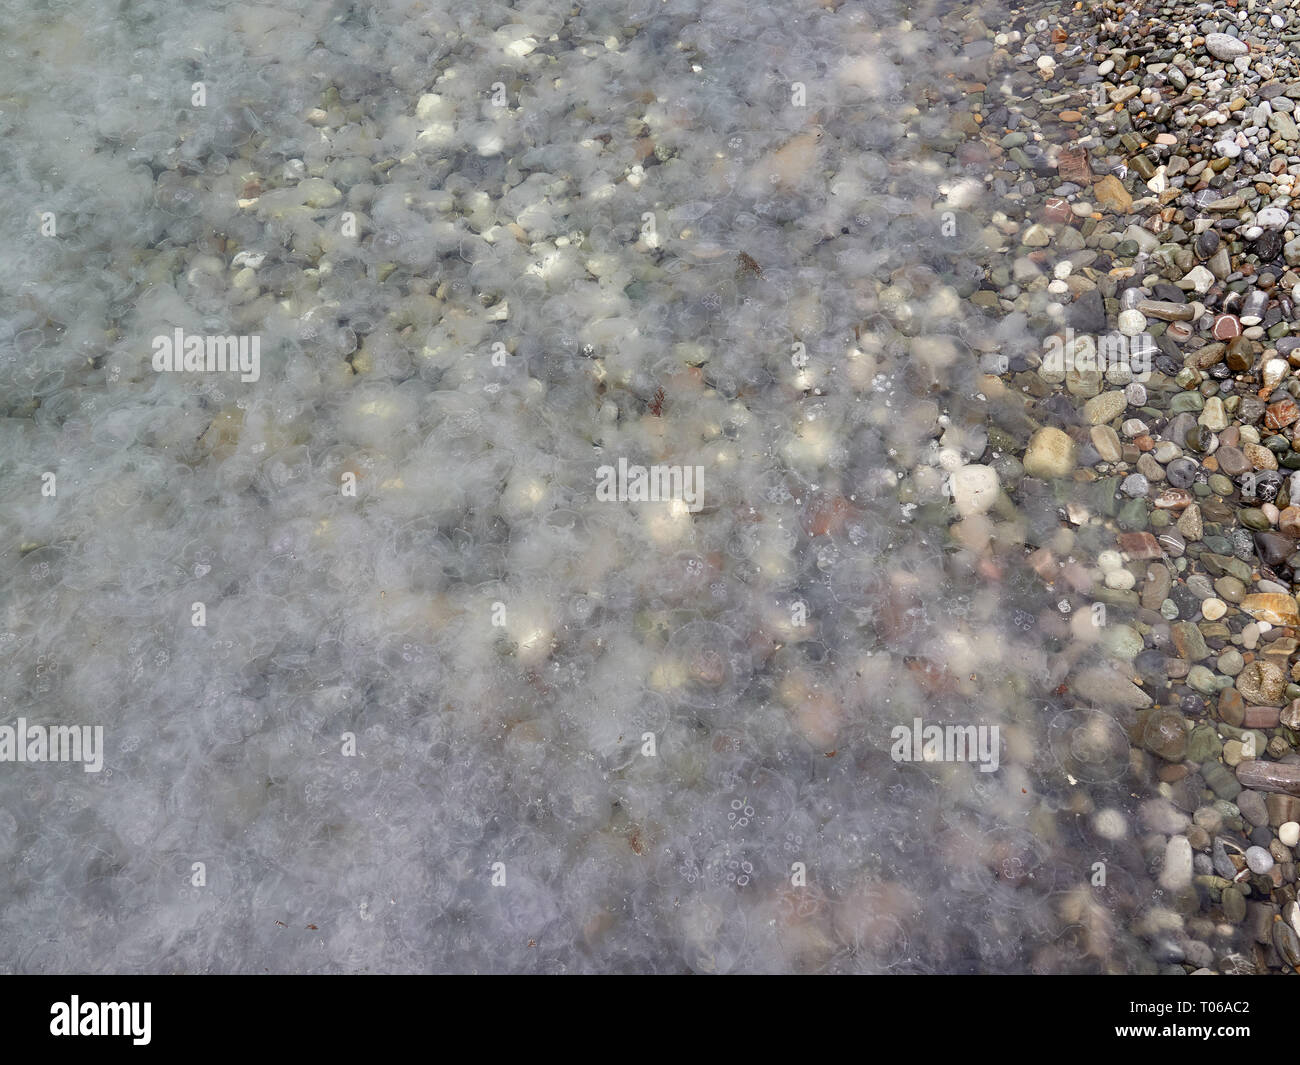 A large number of jellyfish in the sea near the shore Stock Photo